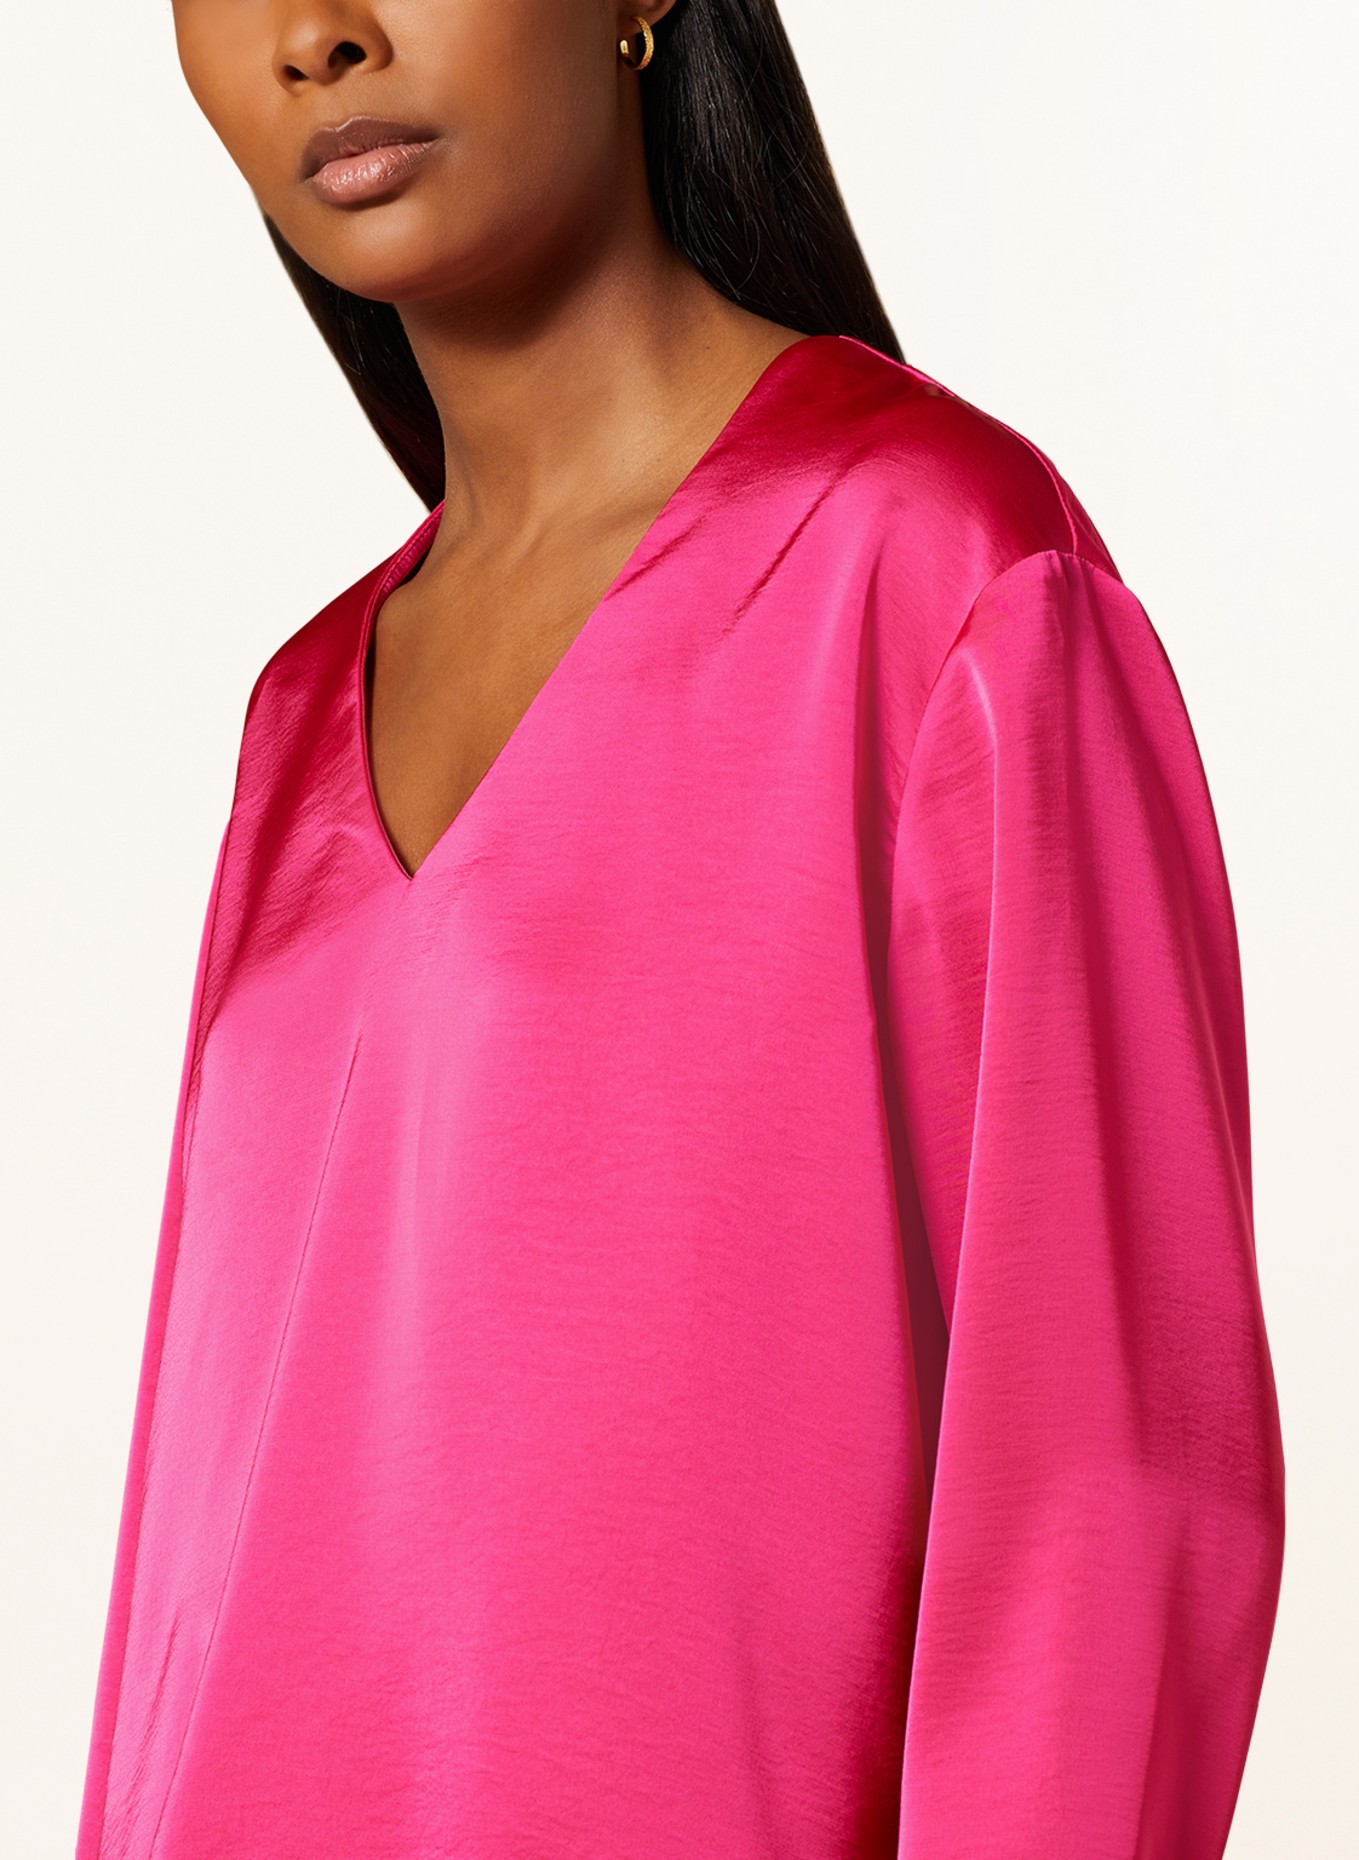 DANTE6 Shirt blouse BODIL made of satin, Color: PINK (Image 4)